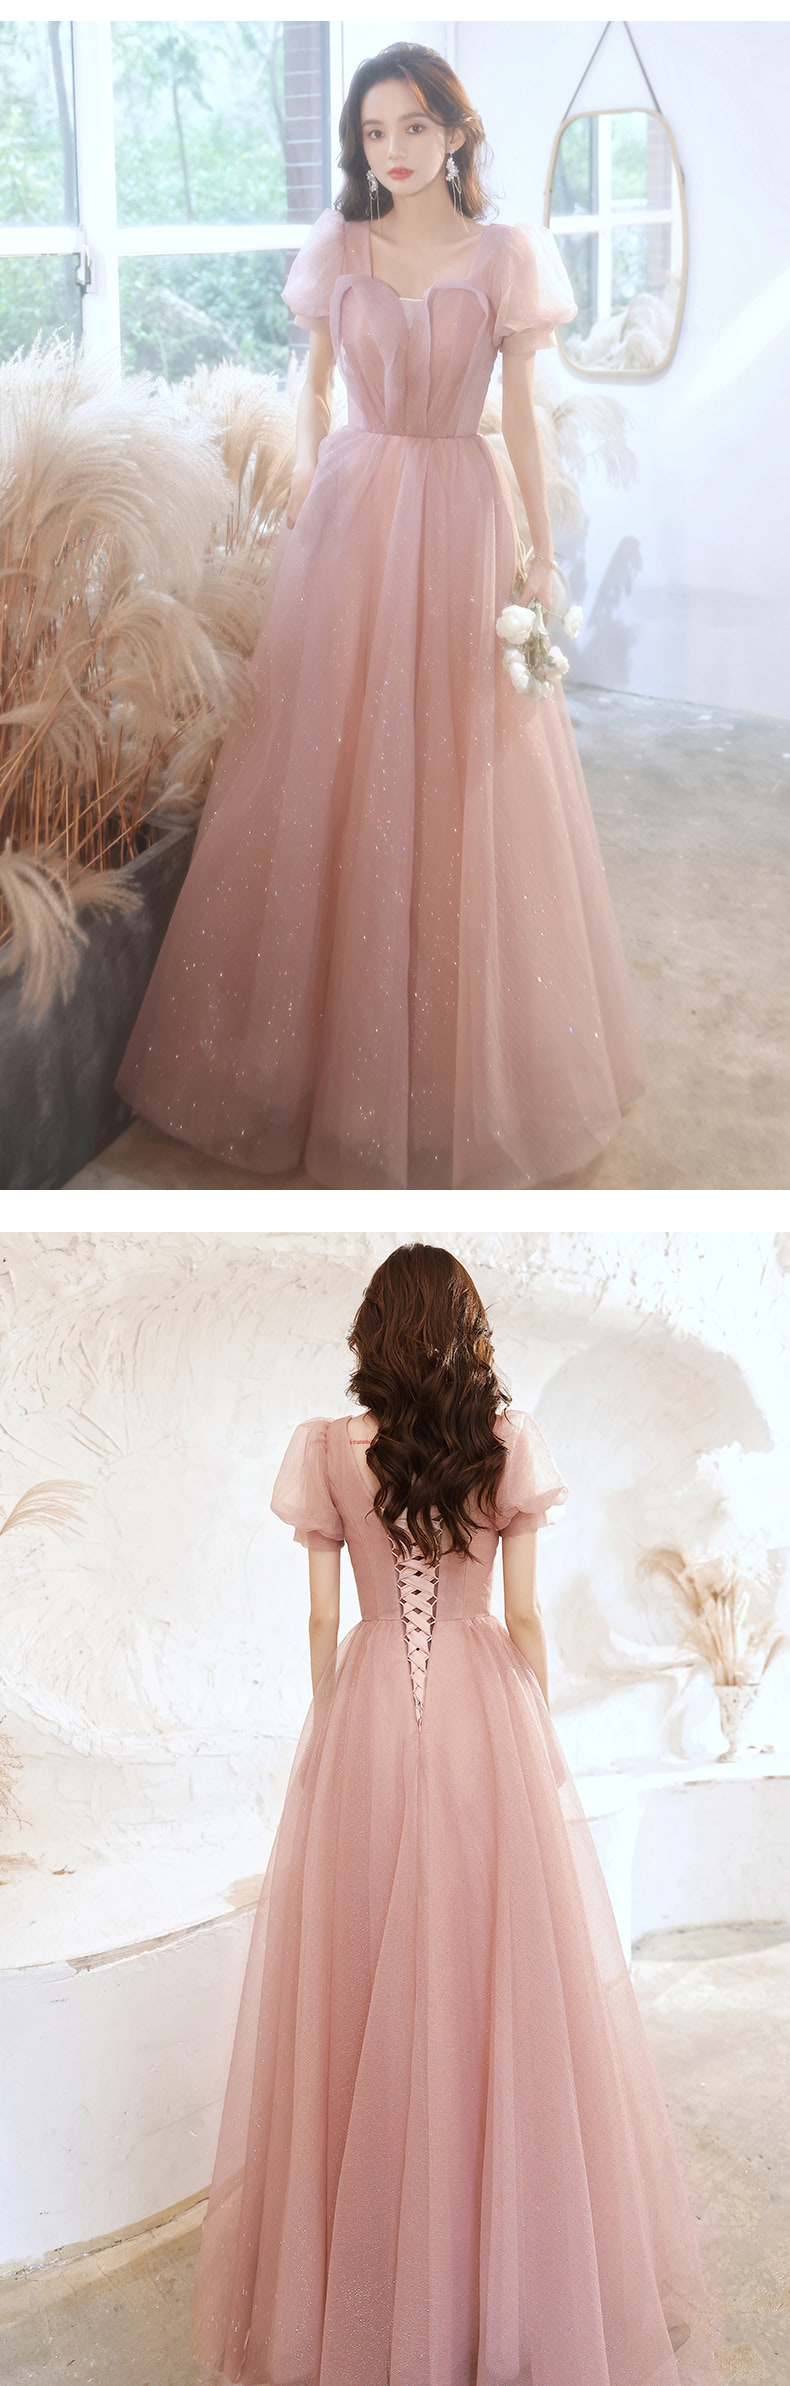 Romantic-Pink-Tulle-Short-Sleeve-Party-Ball-Gown-Formal-Long-Dress14.jpg